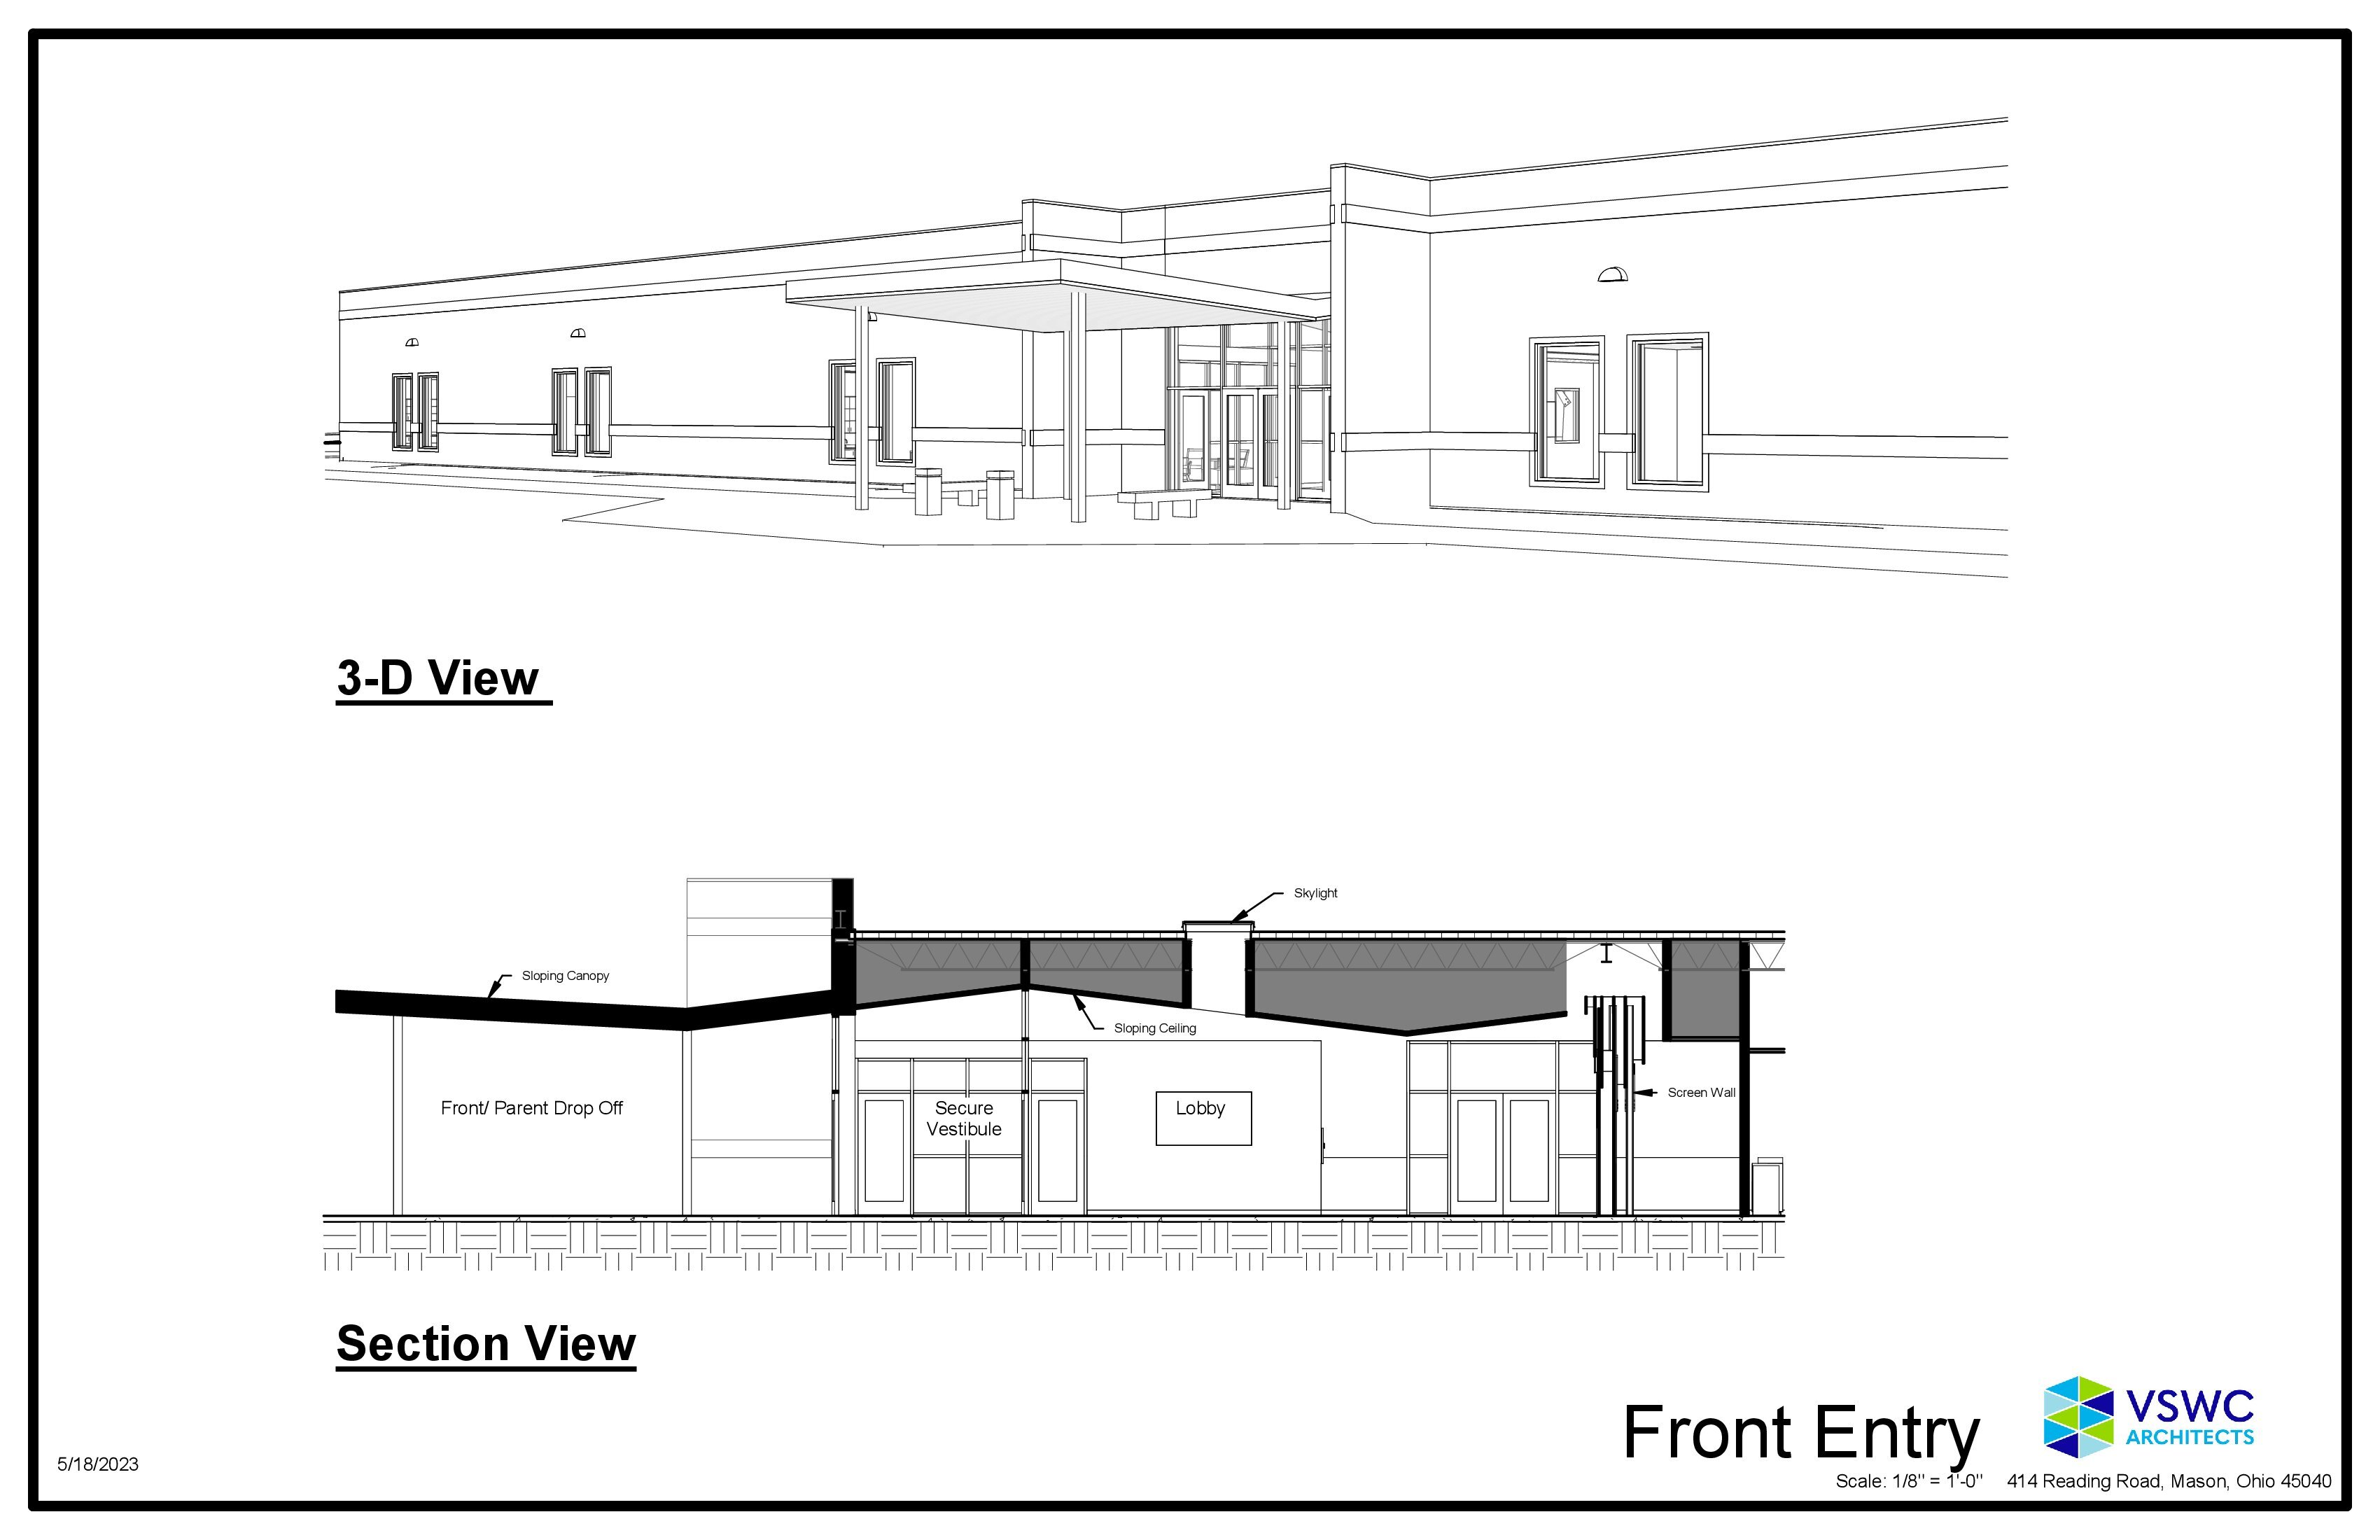 Proposed front entry of Yarmouth conversion